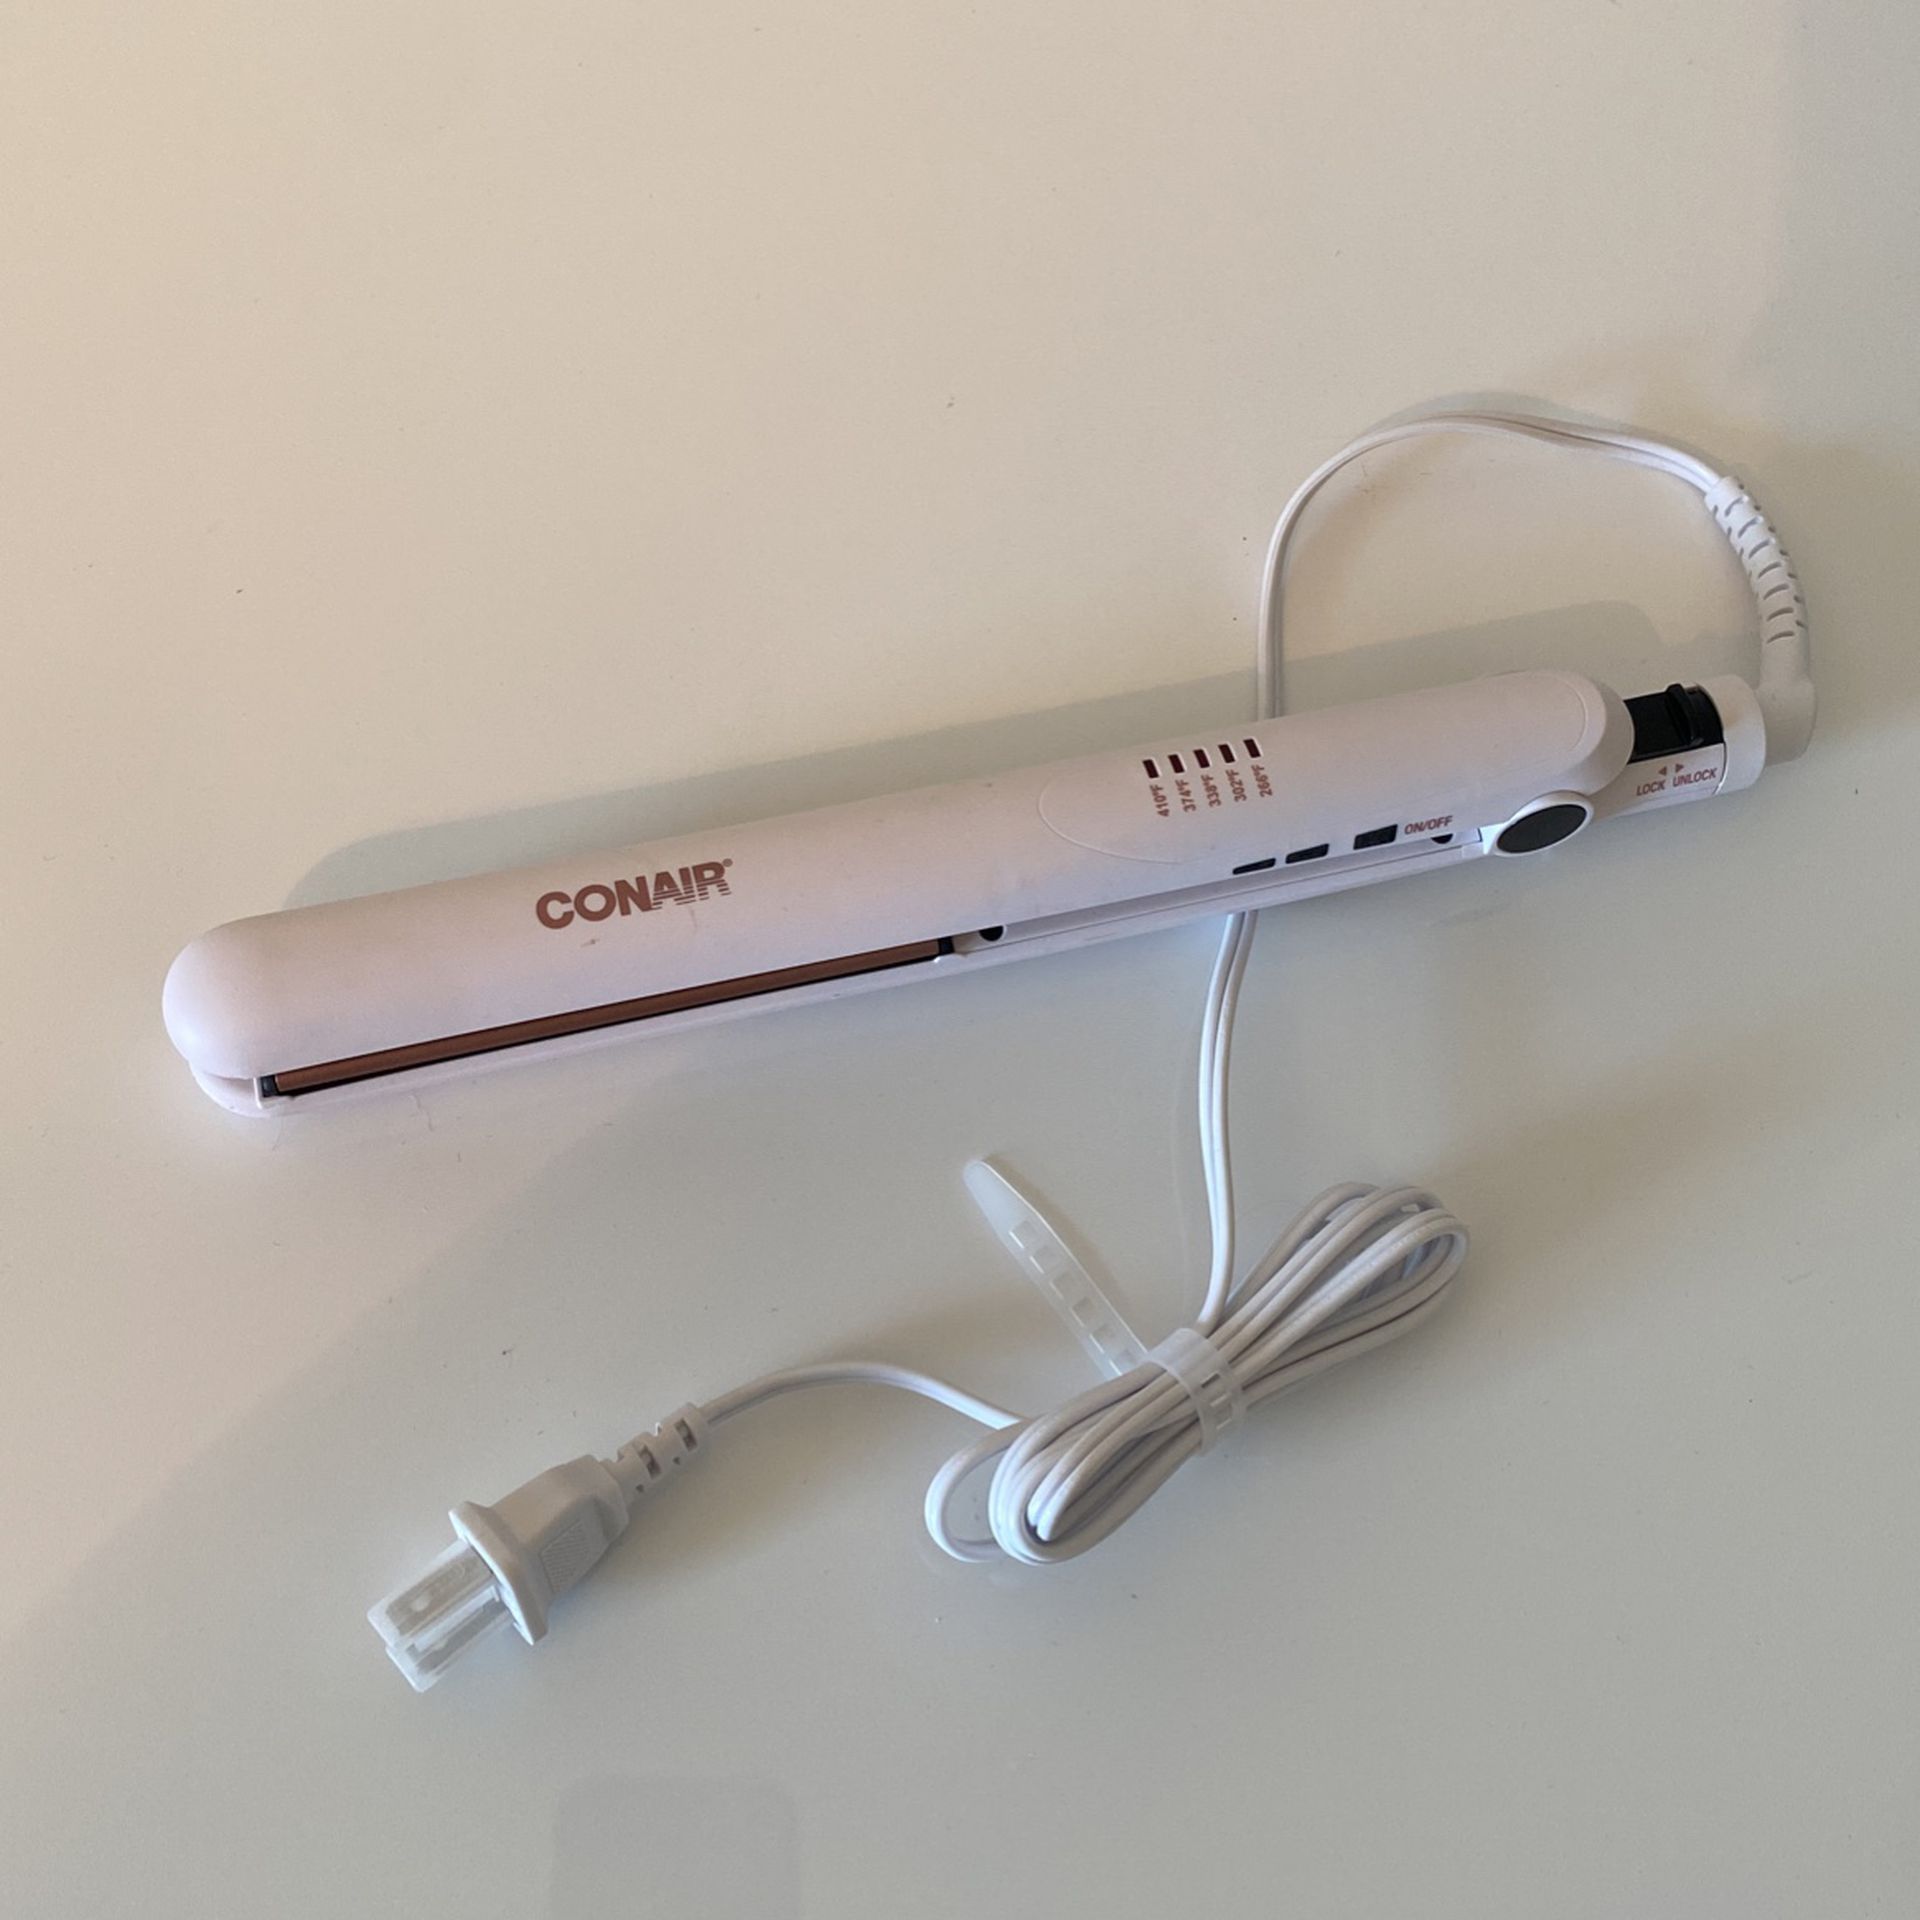 New Without Box Conair Flat Iron